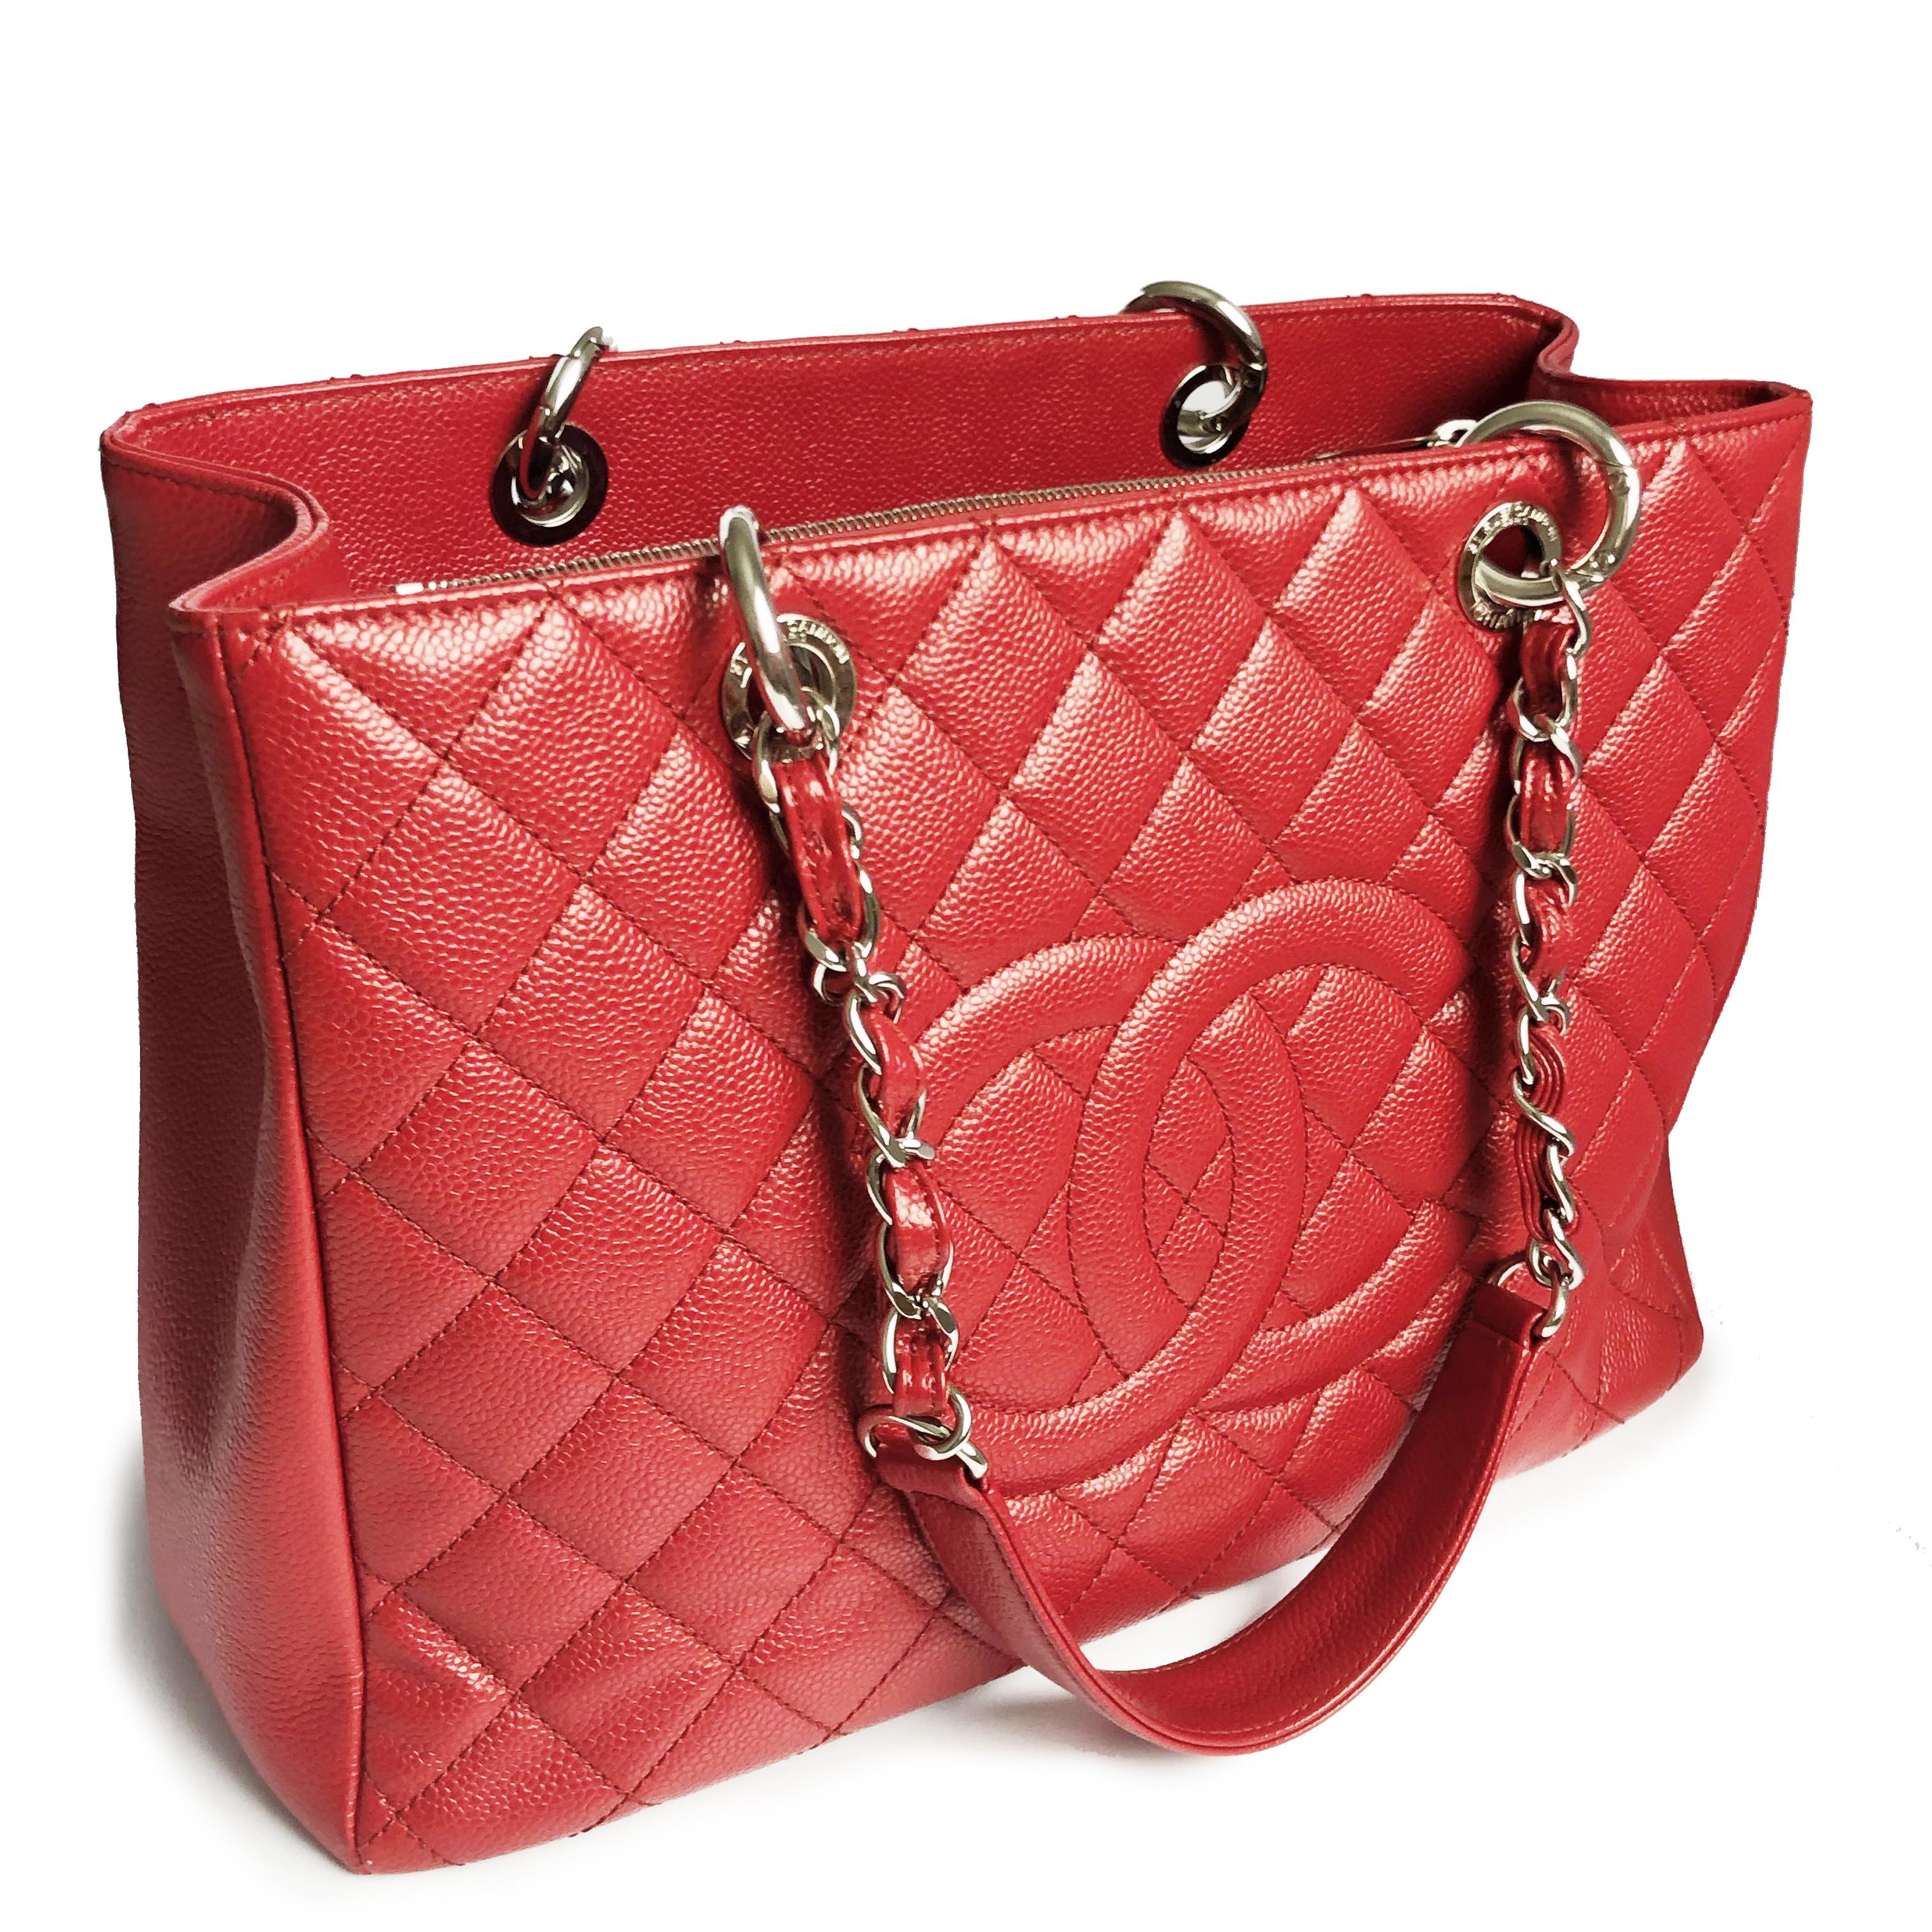 Women's or Men's Chanel GST Grand Shopping Tote Shoulder Bag Red Caviar Leather Silver HW 2013